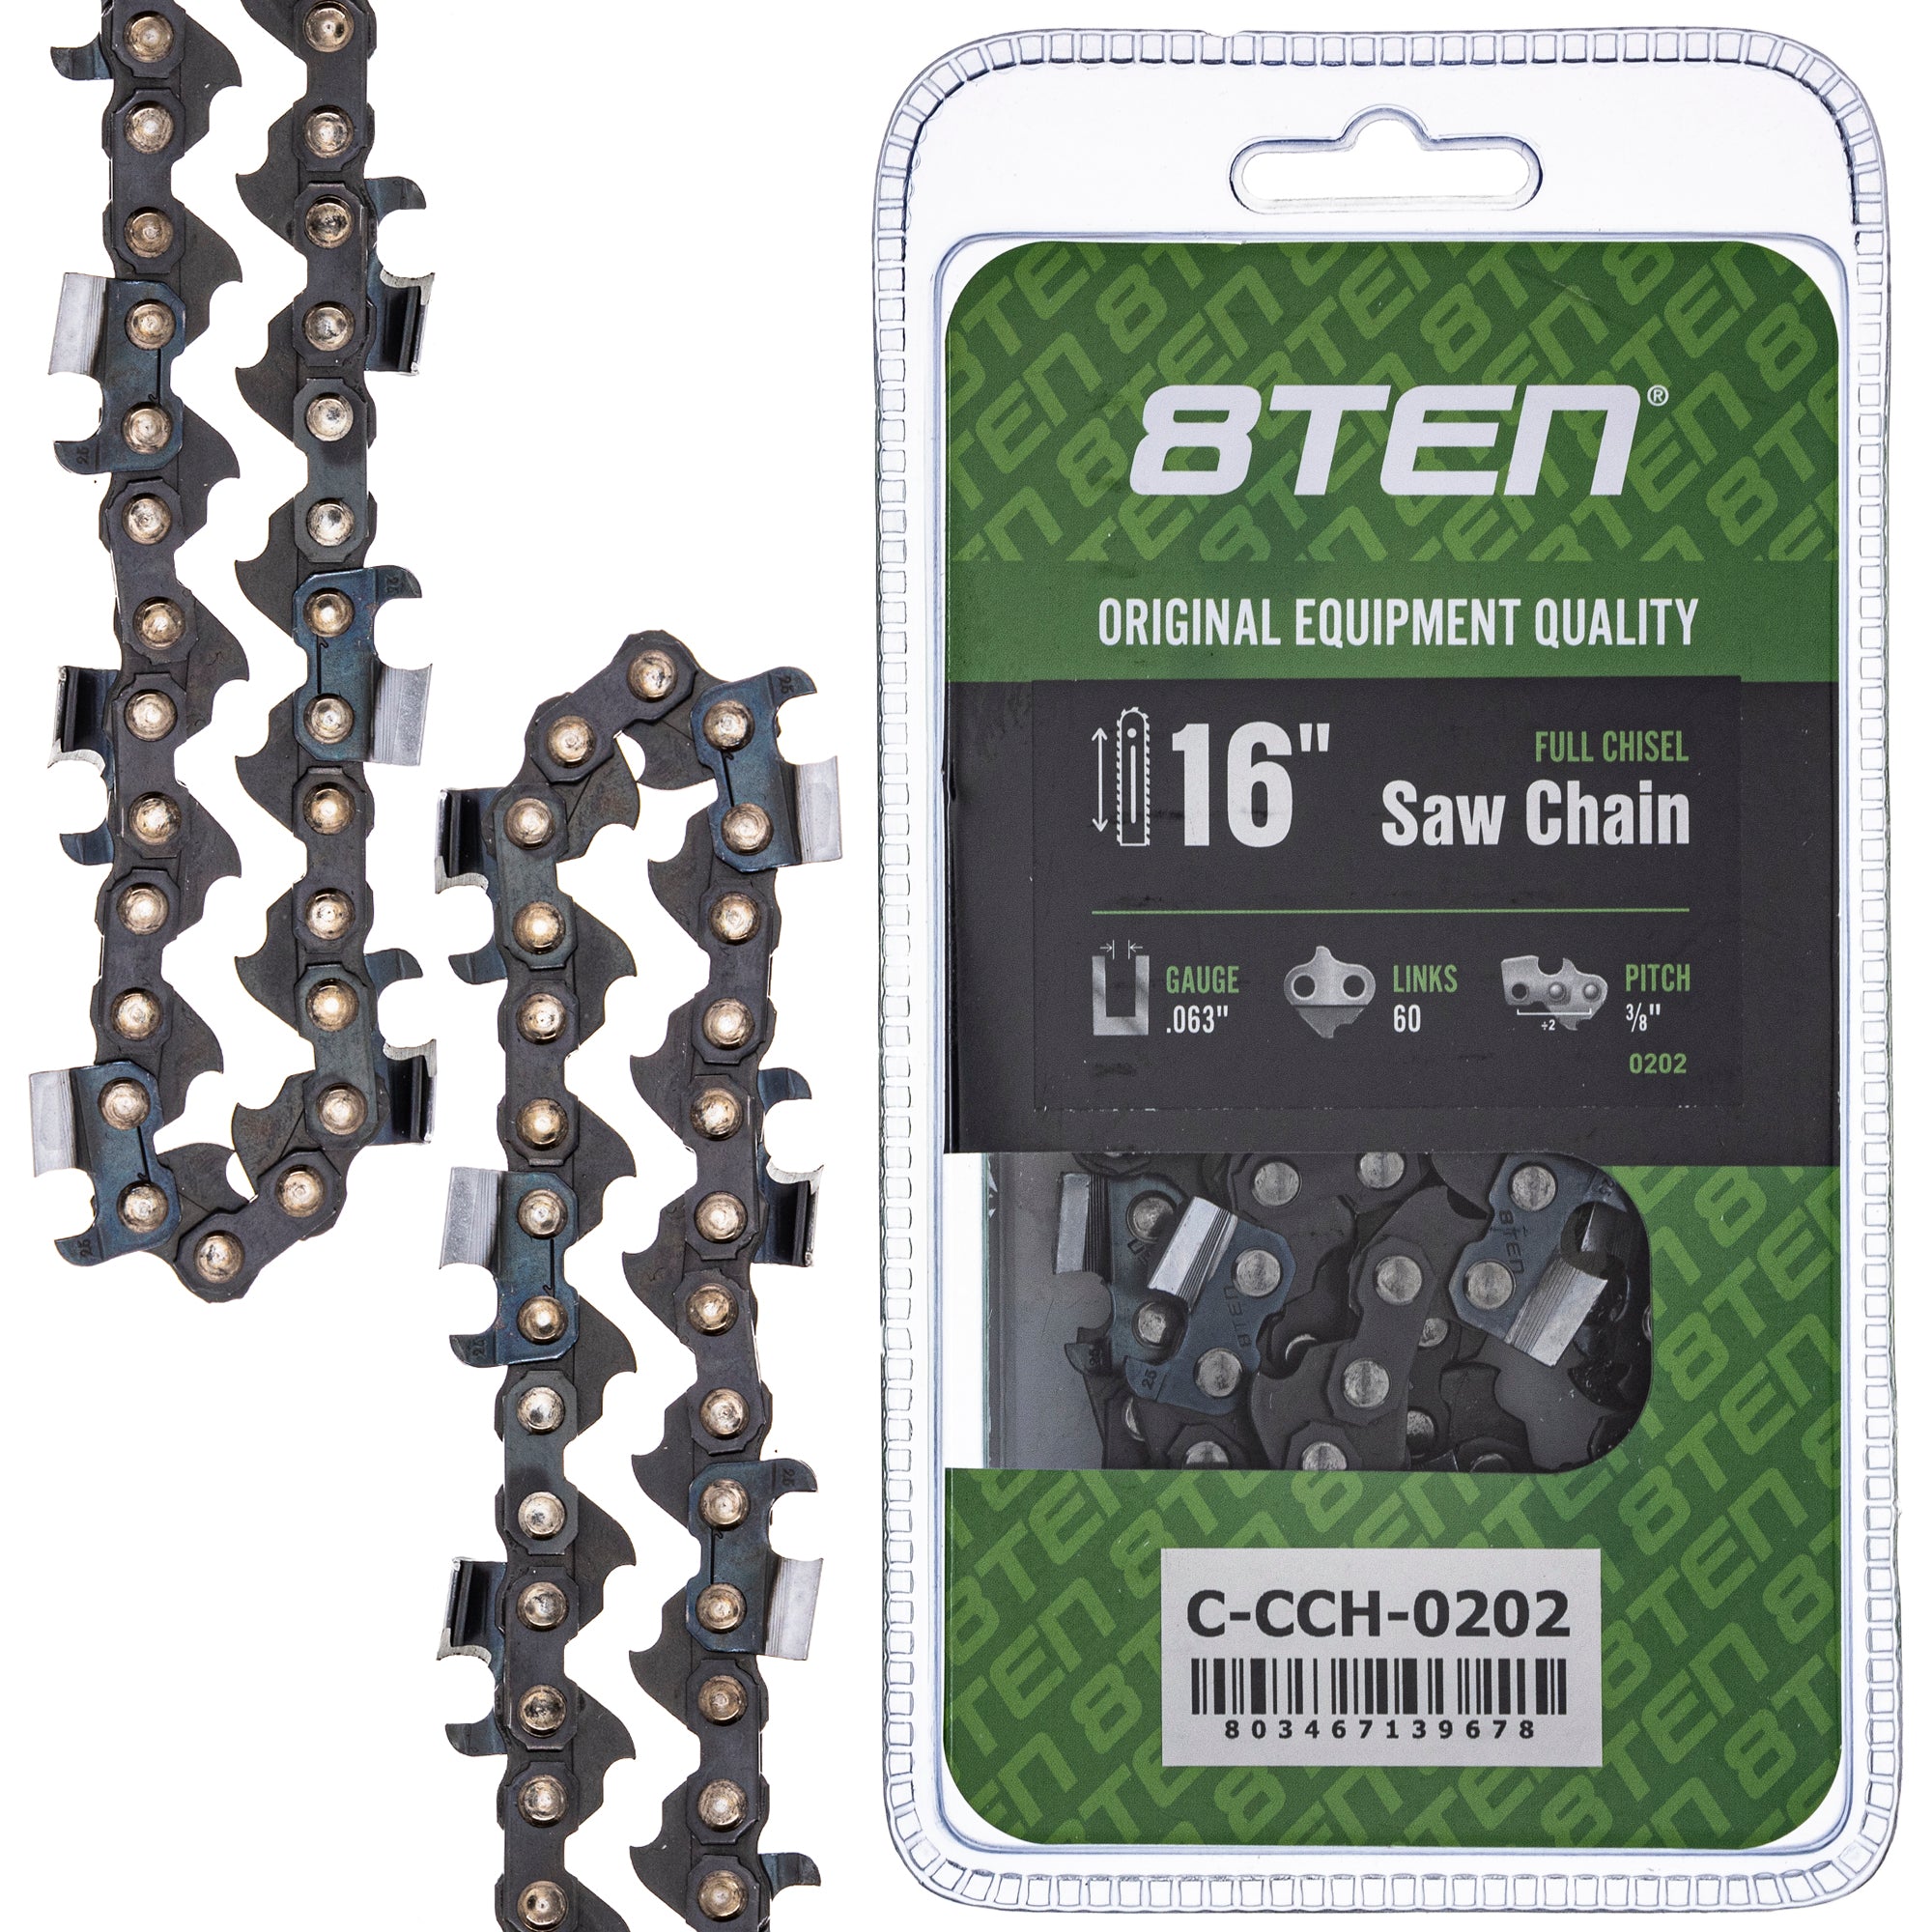 8TEN MK1010474 Guide Bar & Chain for MSE MS E 066